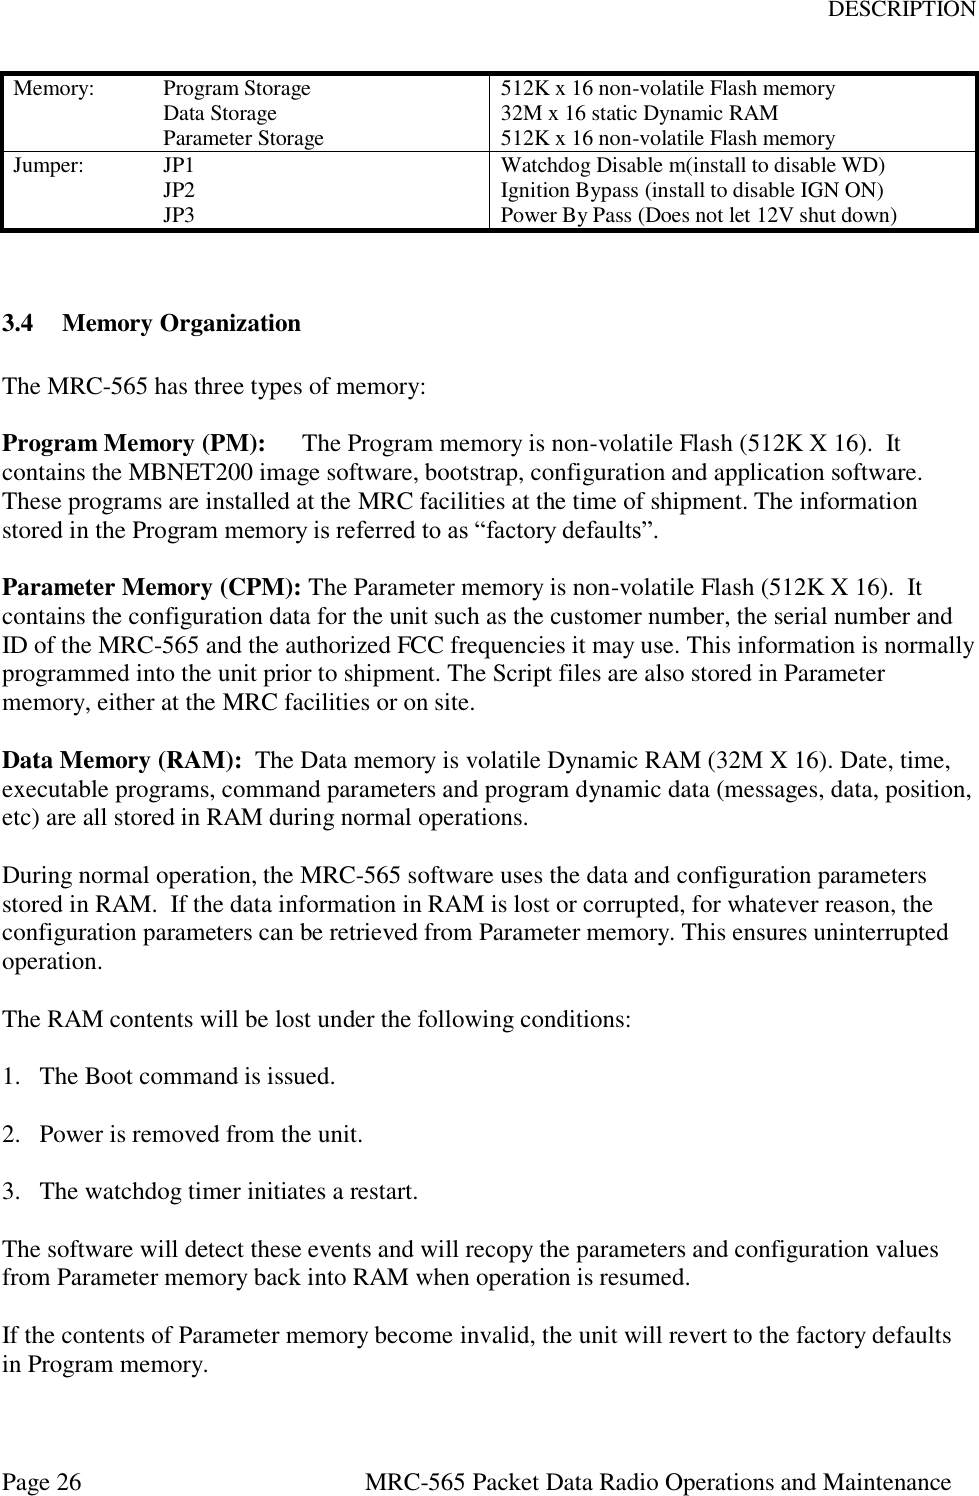 DESCRIPTION Page 26  MRC-565 Packet Data Radio Operations and Maintenance Memory:  Program Storage       Data Storage     Parameter Storage 512K x 16 non-volatile Flash memory 32M x 16 static Dynamic RAM 512K x 16 non-volatile Flash memory Jumper:   JP1     JP2     JP3 Watchdog Disable m(install to disable WD) Ignition Bypass (install to disable IGN ON) Power By Pass (Does not let 12V shut down)   3.4 Memory Organization  The MRC-565 has three types of memory:  Program Memory (PM):  The Program memory is non-volatile Flash (512K X 16).  It contains the MBNET200 image software, bootstrap, configuration and application software. These programs are installed at the MRC facilities at the time of shipment. The information stored in the Program memory is referred to as “factory defaults”.  Parameter Memory (CPM): The Parameter memory is non-volatile Flash (512K X 16).  It contains the configuration data for the unit such as the customer number, the serial number and ID of the MRC-565 and the authorized FCC frequencies it may use. This information is normally programmed into the unit prior to shipment. The Script files are also stored in Parameter memory, either at the MRC facilities or on site.  Data Memory (RAM):  The Data memory is volatile Dynamic RAM (32M X 16). Date, time, executable programs, command parameters and program dynamic data (messages, data, position, etc) are all stored in RAM during normal operations.    During normal operation, the MRC-565 software uses the data and configuration parameters stored in RAM.  If the data information in RAM is lost or corrupted, for whatever reason, the configuration parameters can be retrieved from Parameter memory. This ensures uninterrupted operation.  The RAM contents will be lost under the following conditions:  1.  The Boot command is issued.  2.  Power is removed from the unit.  3.  The watchdog timer initiates a restart.  The software will detect these events and will recopy the parameters and configuration values from Parameter memory back into RAM when operation is resumed.  If the contents of Parameter memory become invalid, the unit will revert to the factory defaults in Program memory.  